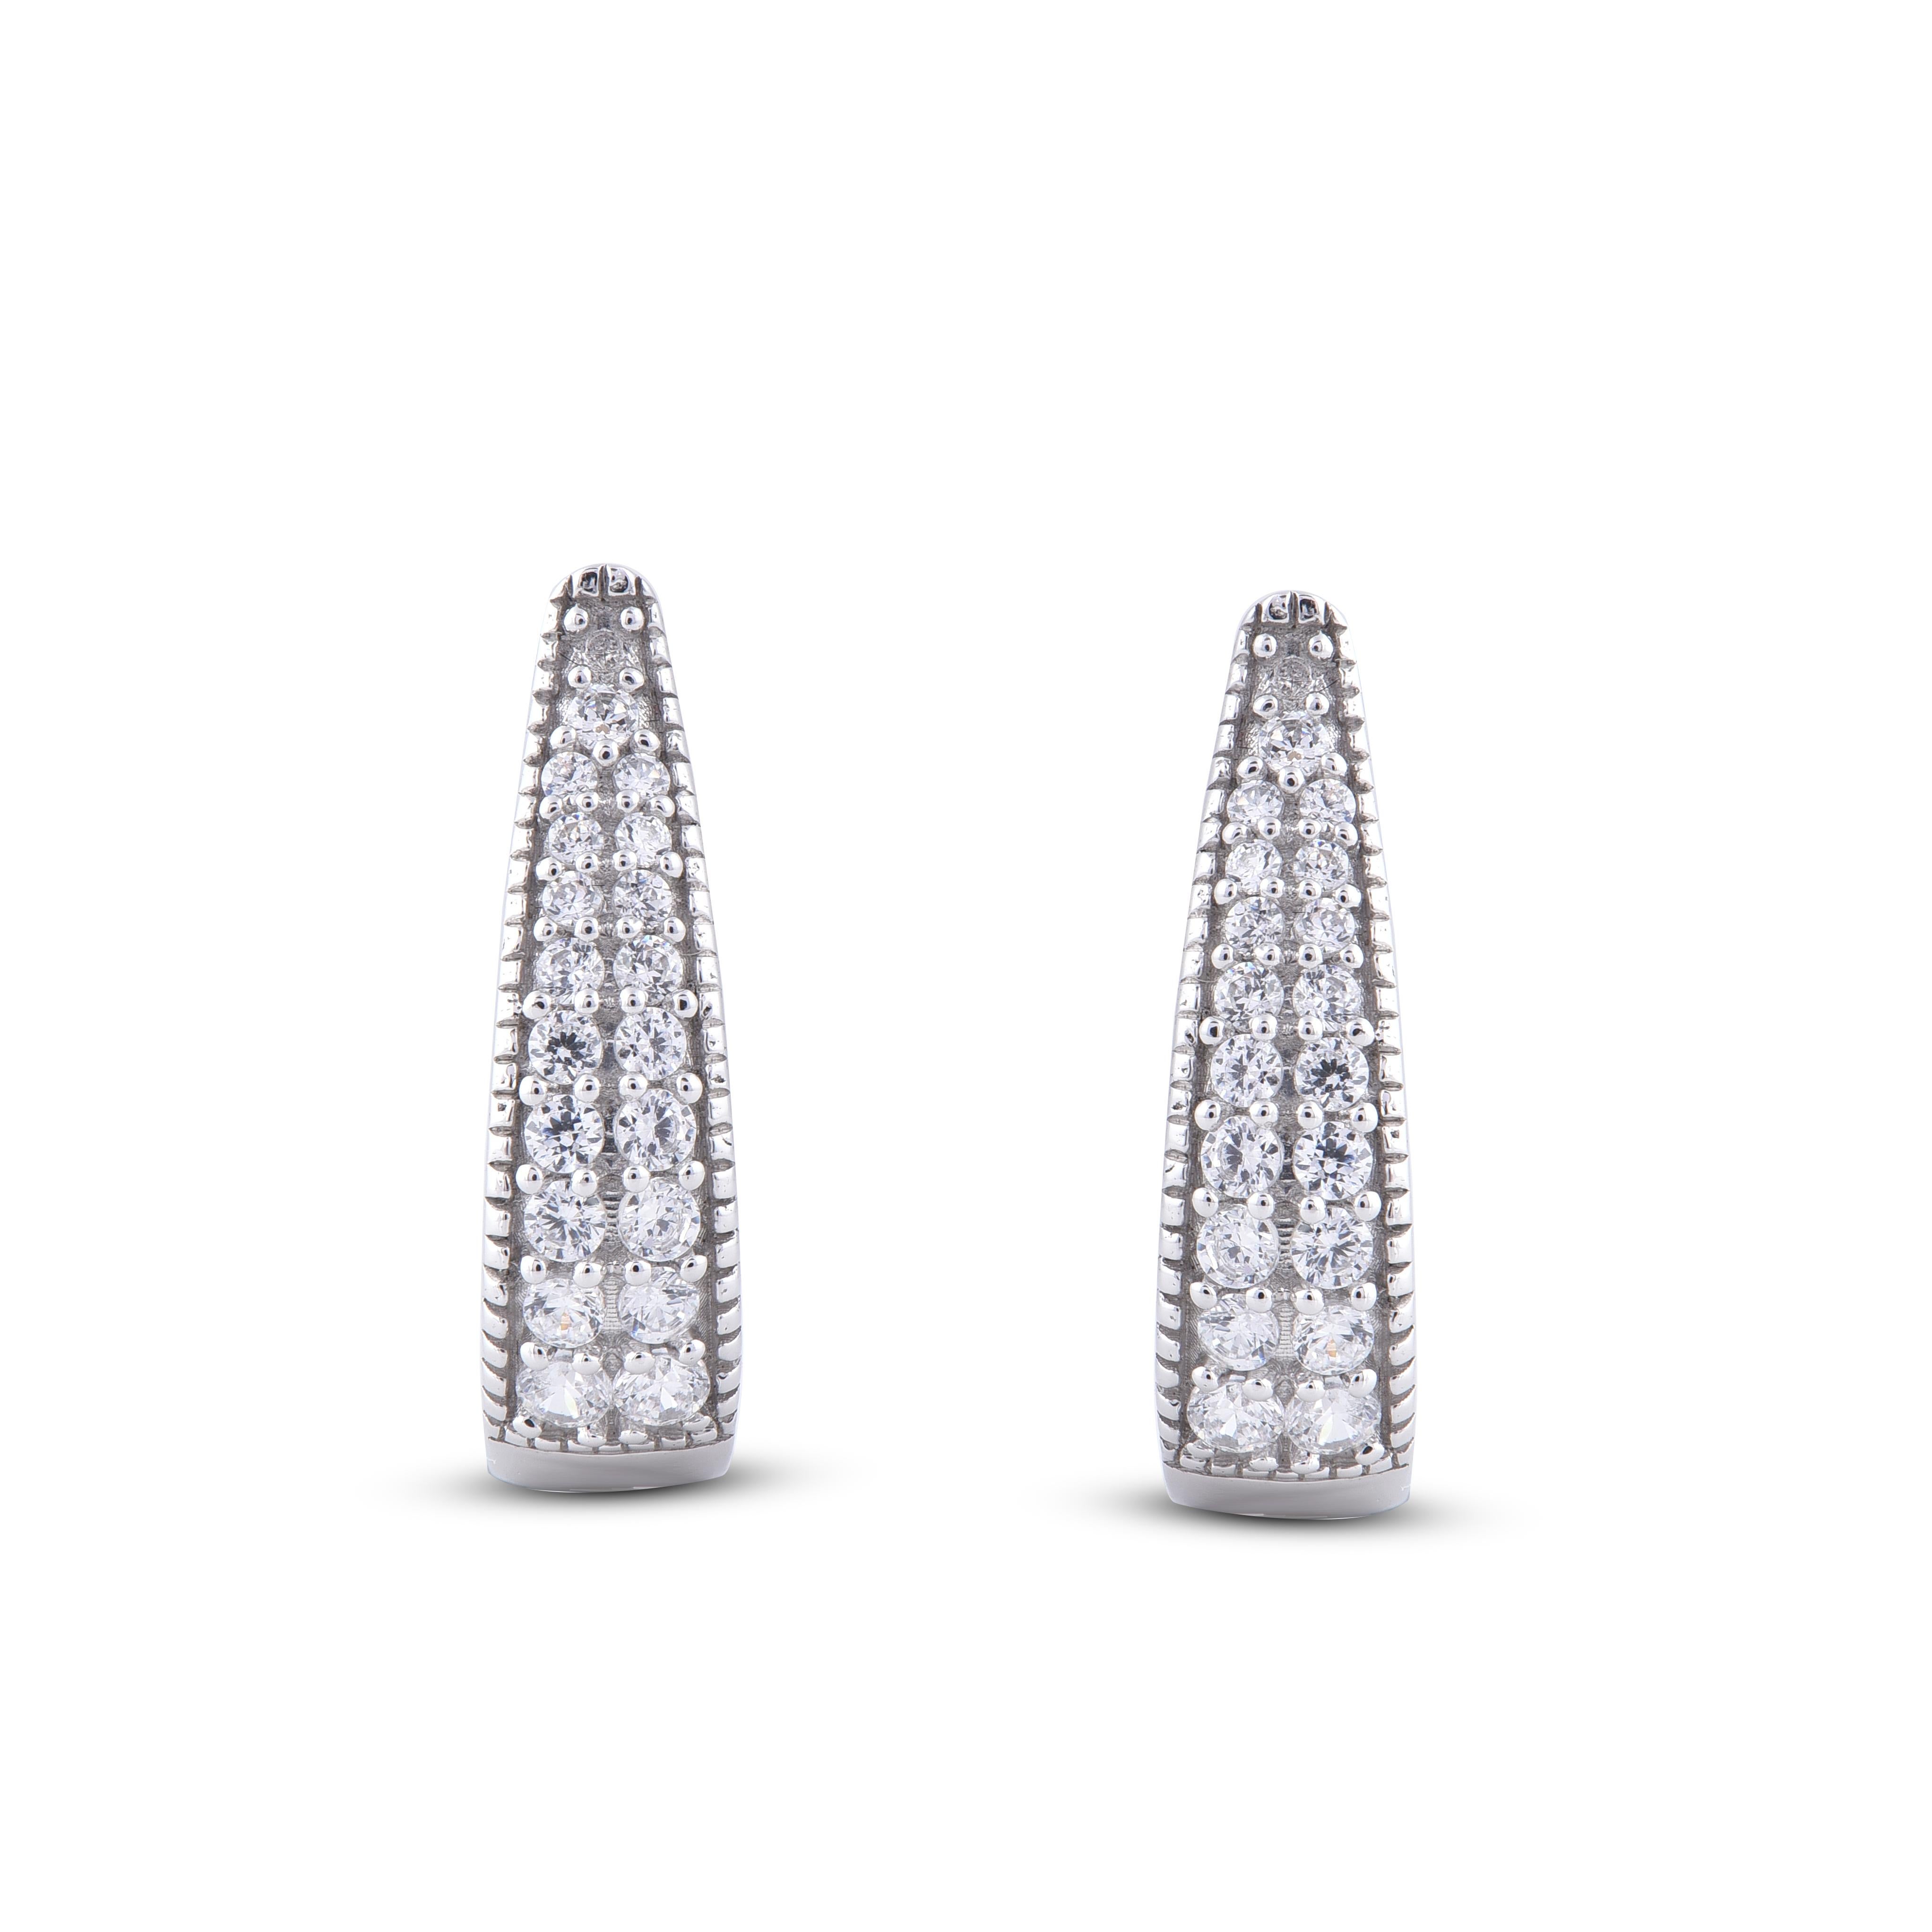 A sparkling delight, these diamond earrings fit her charming aesthetic. Embellished in 14 karat white Gold with 40 round diamond set in pave setting, and dazzles with H-I color I2 clarity. Captivating with 0.50 Carat and secures comfortably with